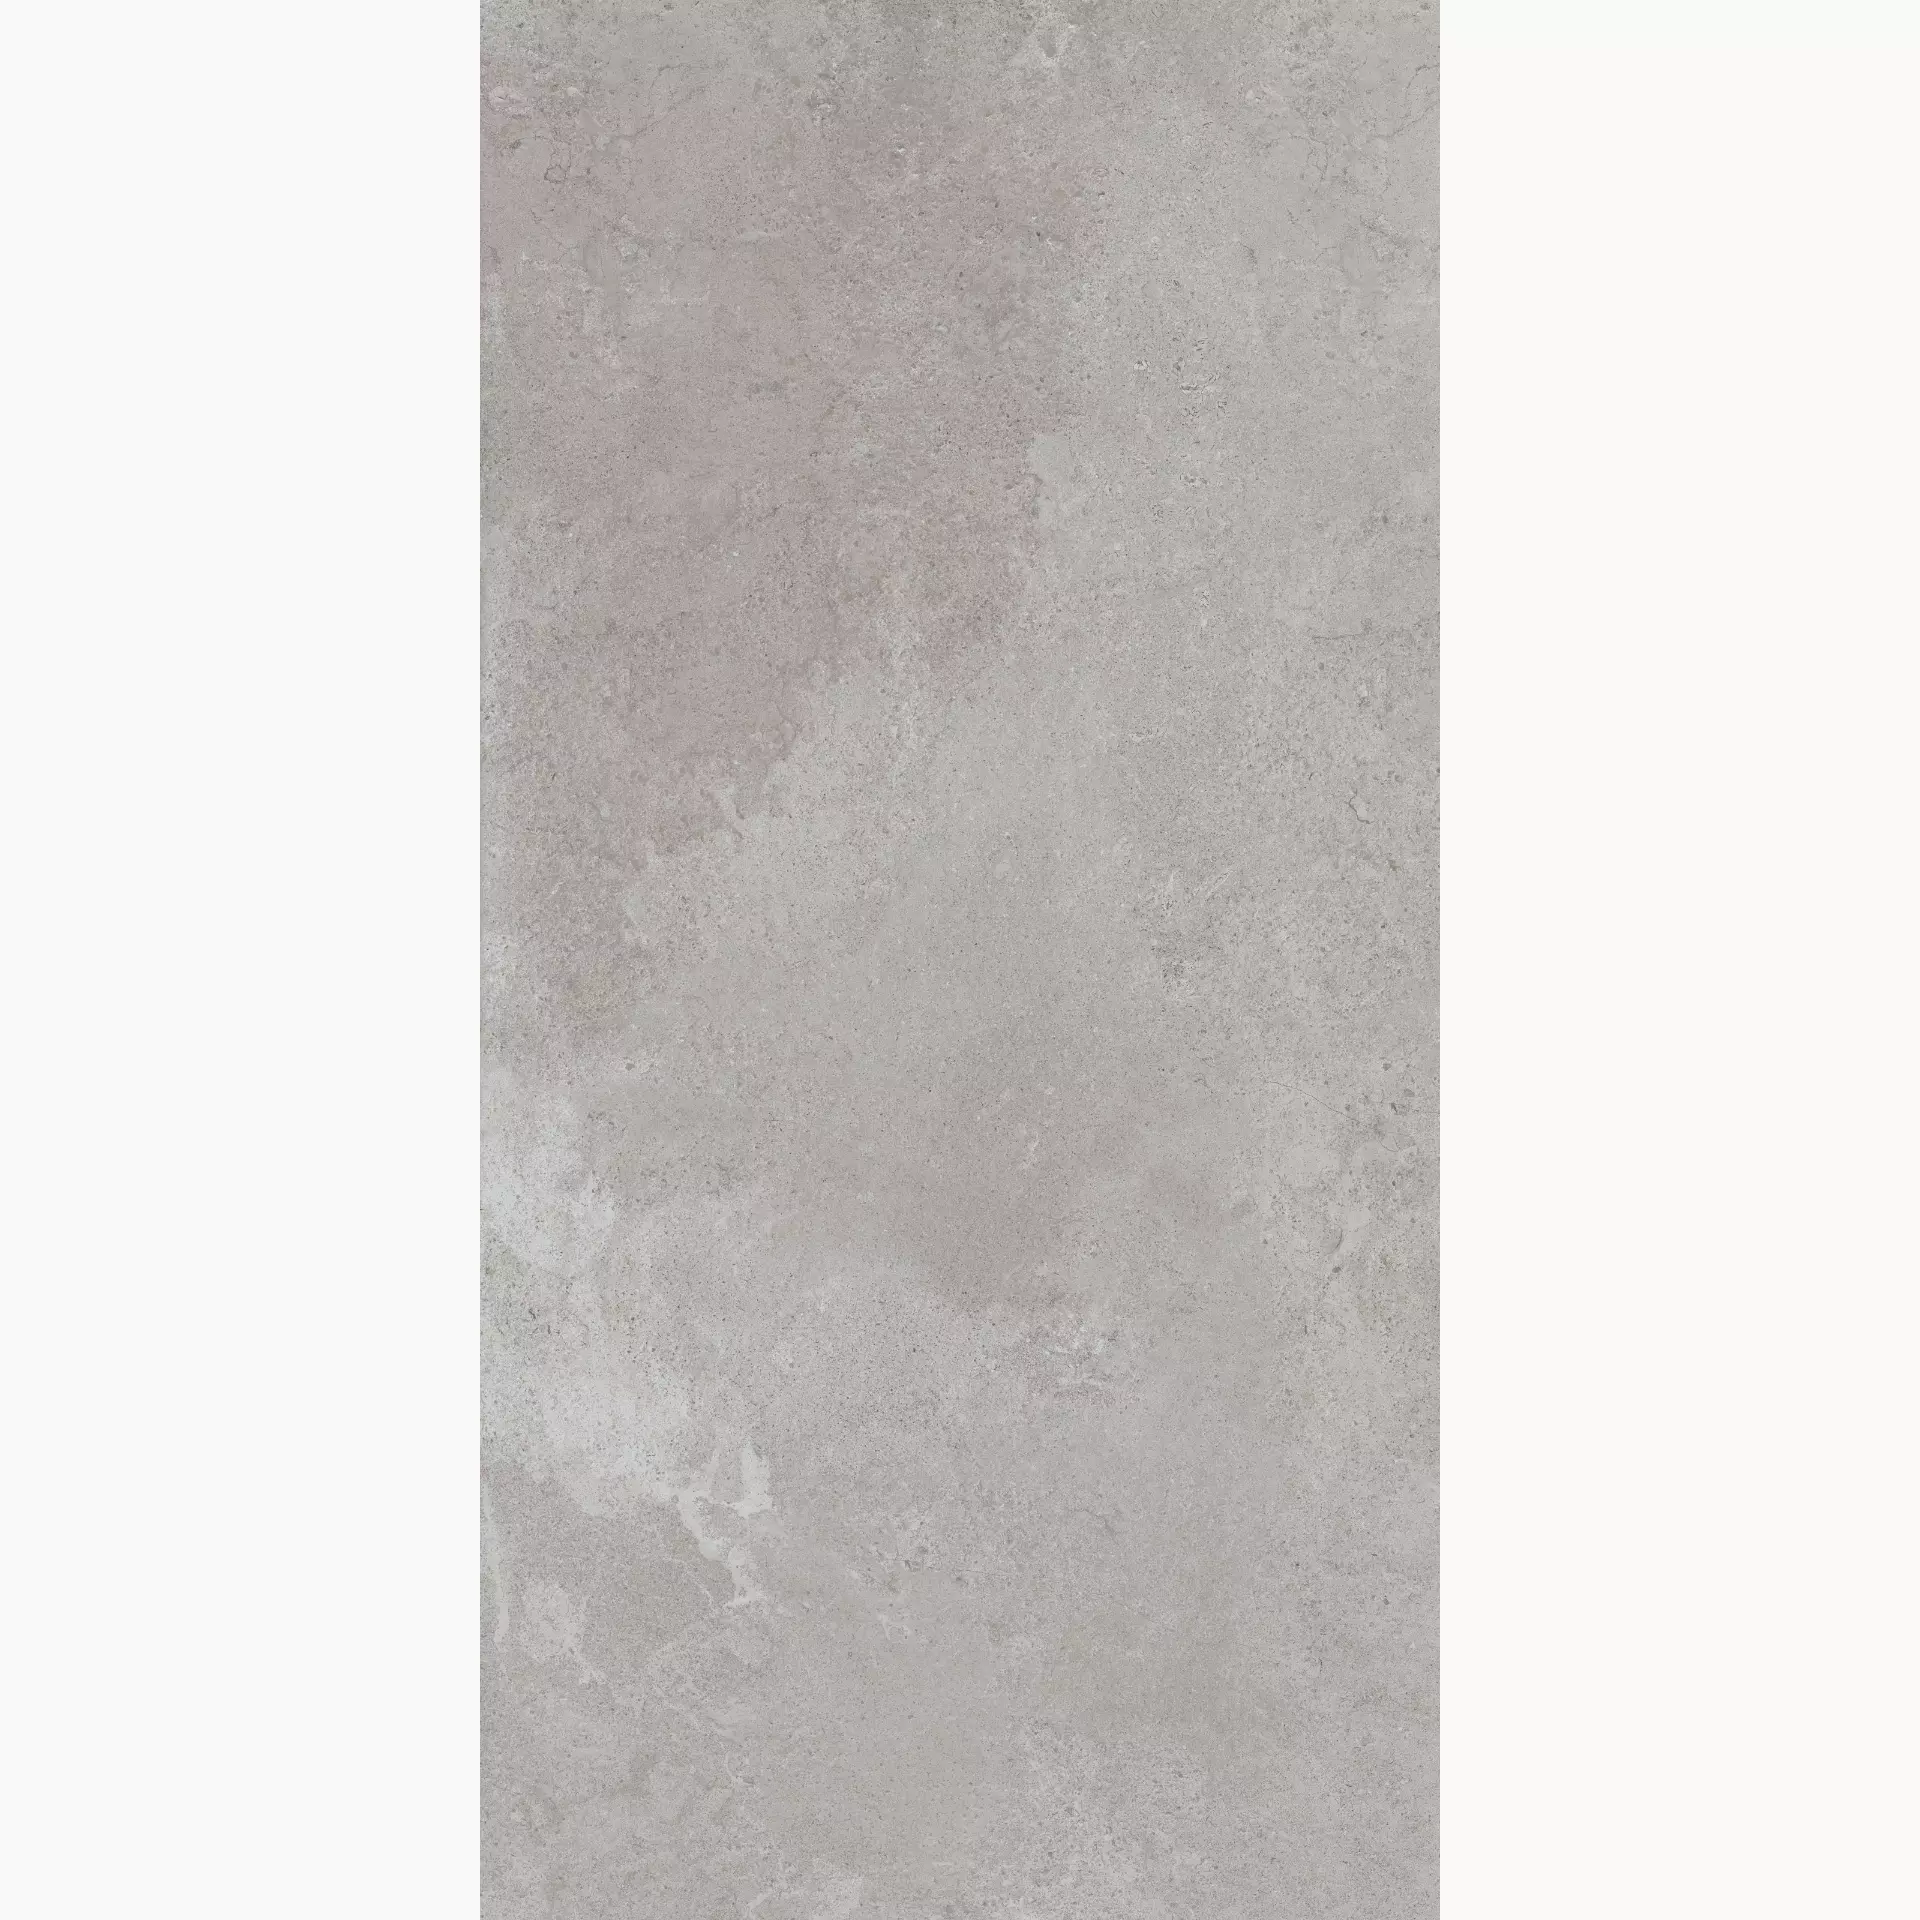 ABK Alpes Wide Grey Naturale PF60000204 80x160cm rectified 8,5mm